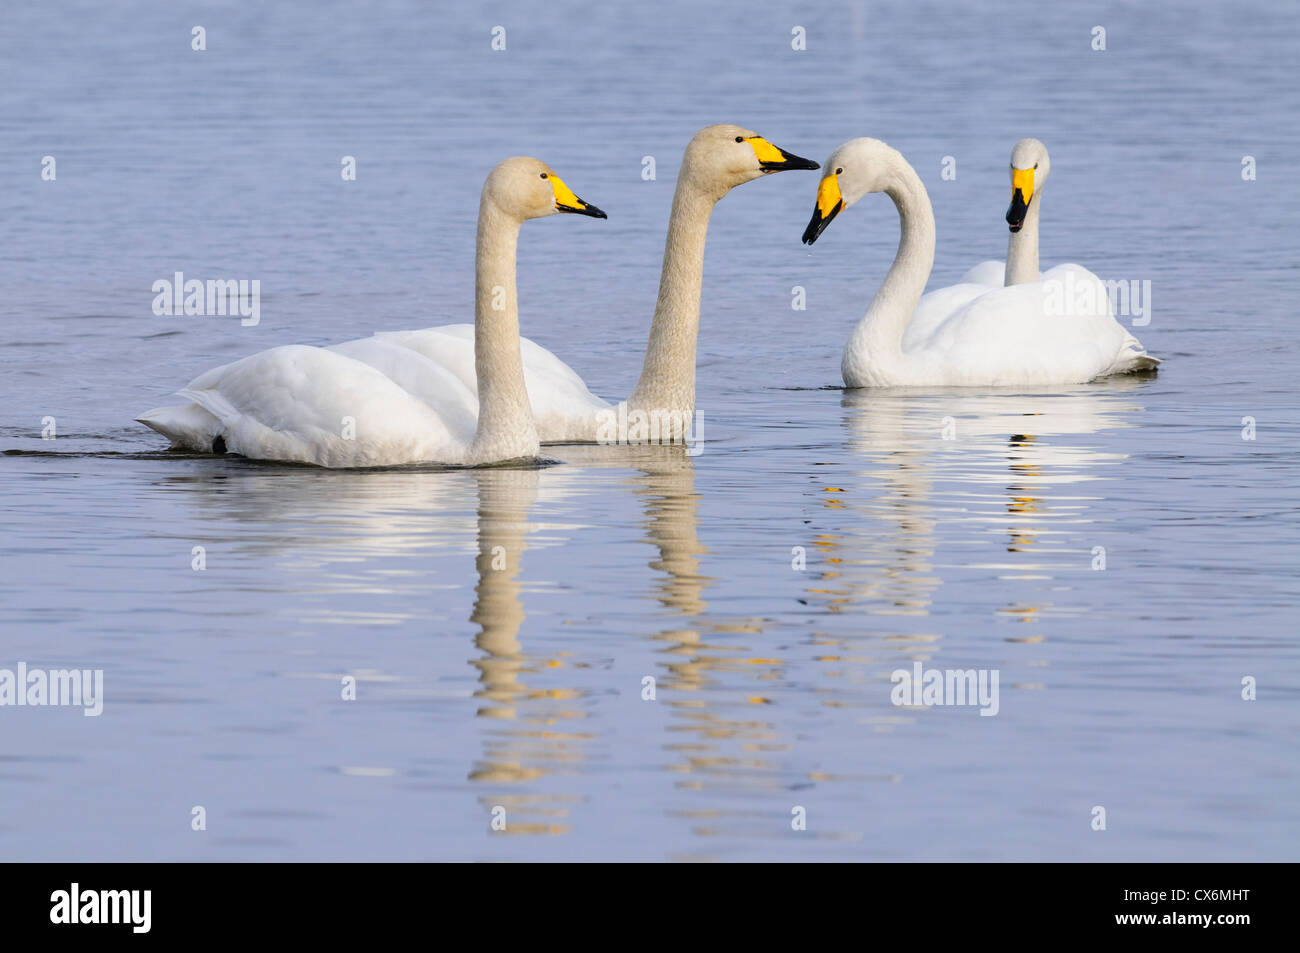 Group of whooper swans swimming in a lake in nice soft evening light Stock Photo